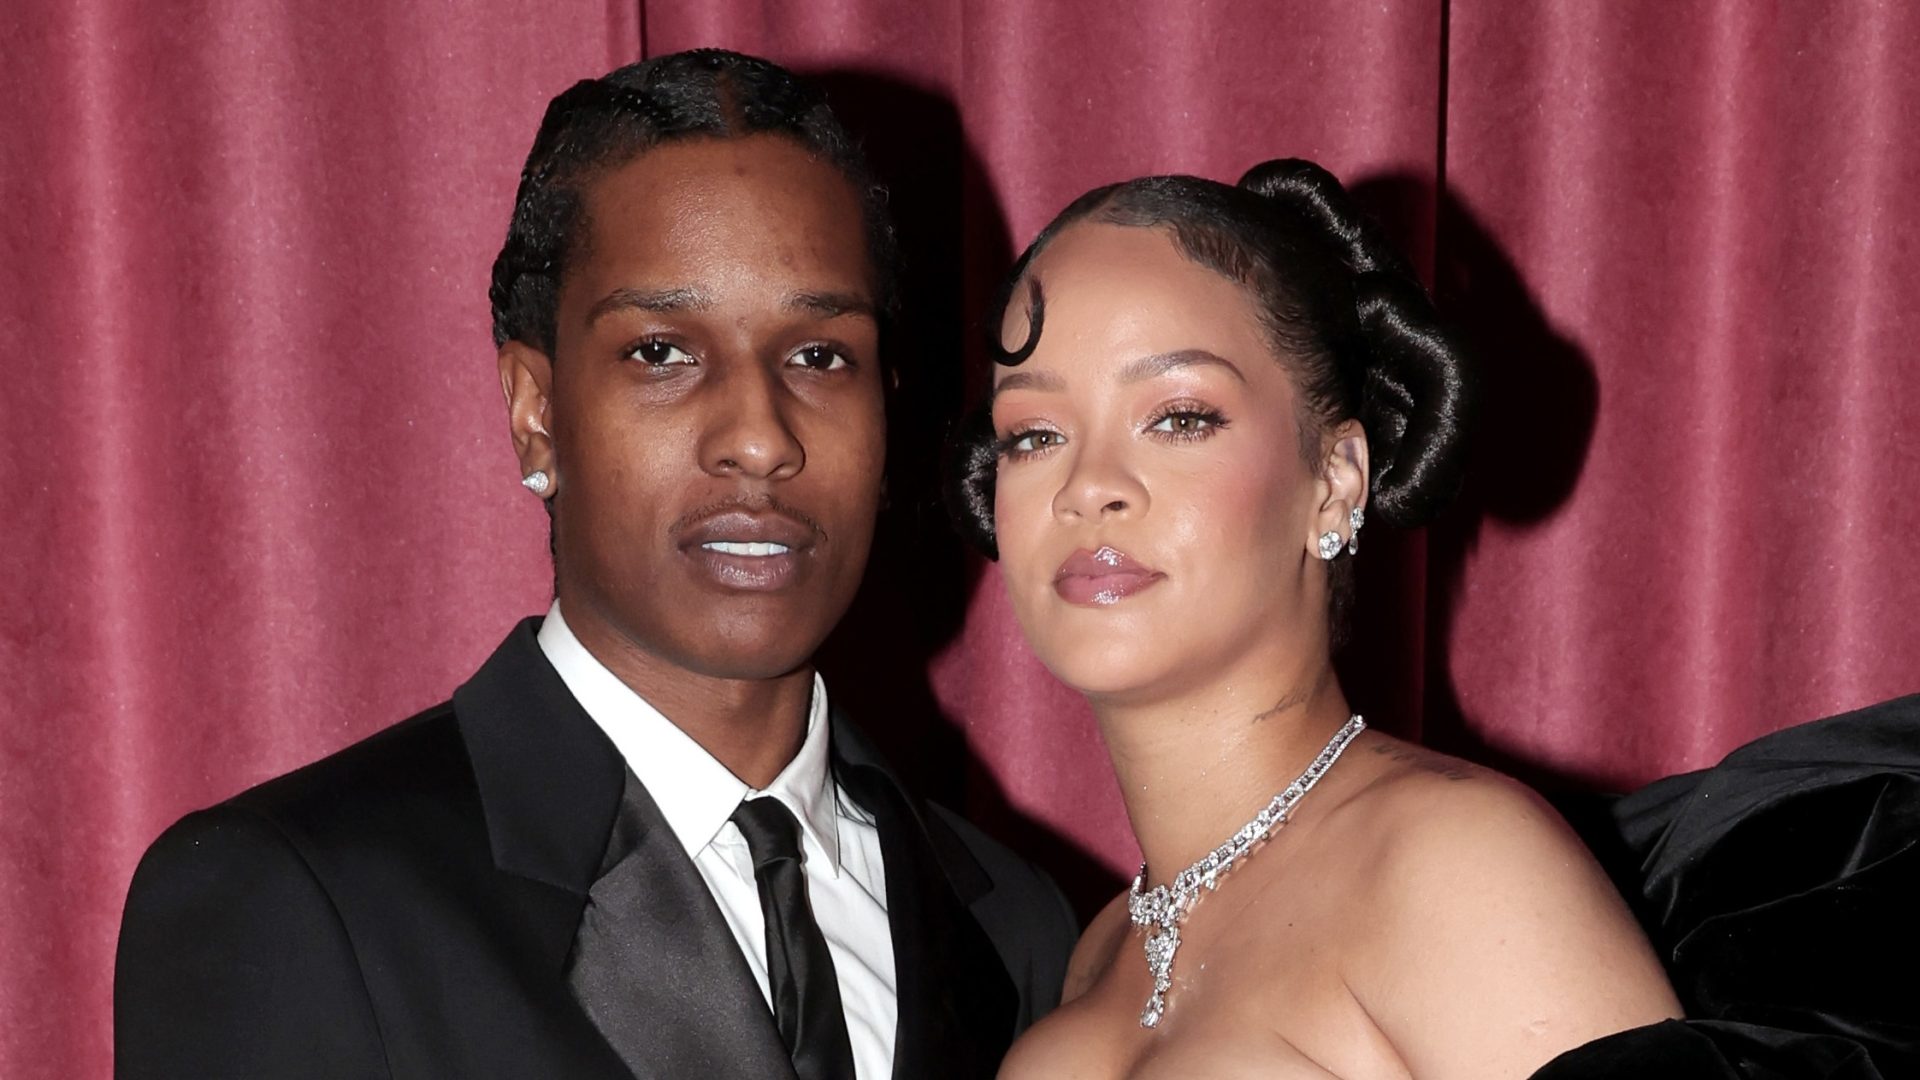 BEVERLY HILLS, CALIFORNIA - JANUARY 10: 80th Annual GOLDEN GLOBE AWARDS -- Pictured: (l-r) A$AP Rocky and Rihanna attend the 80th Annual Golden Globe Awards held at the Beverly Hilton Hotel on January 10, 2023 in Beverly Hills, California. --